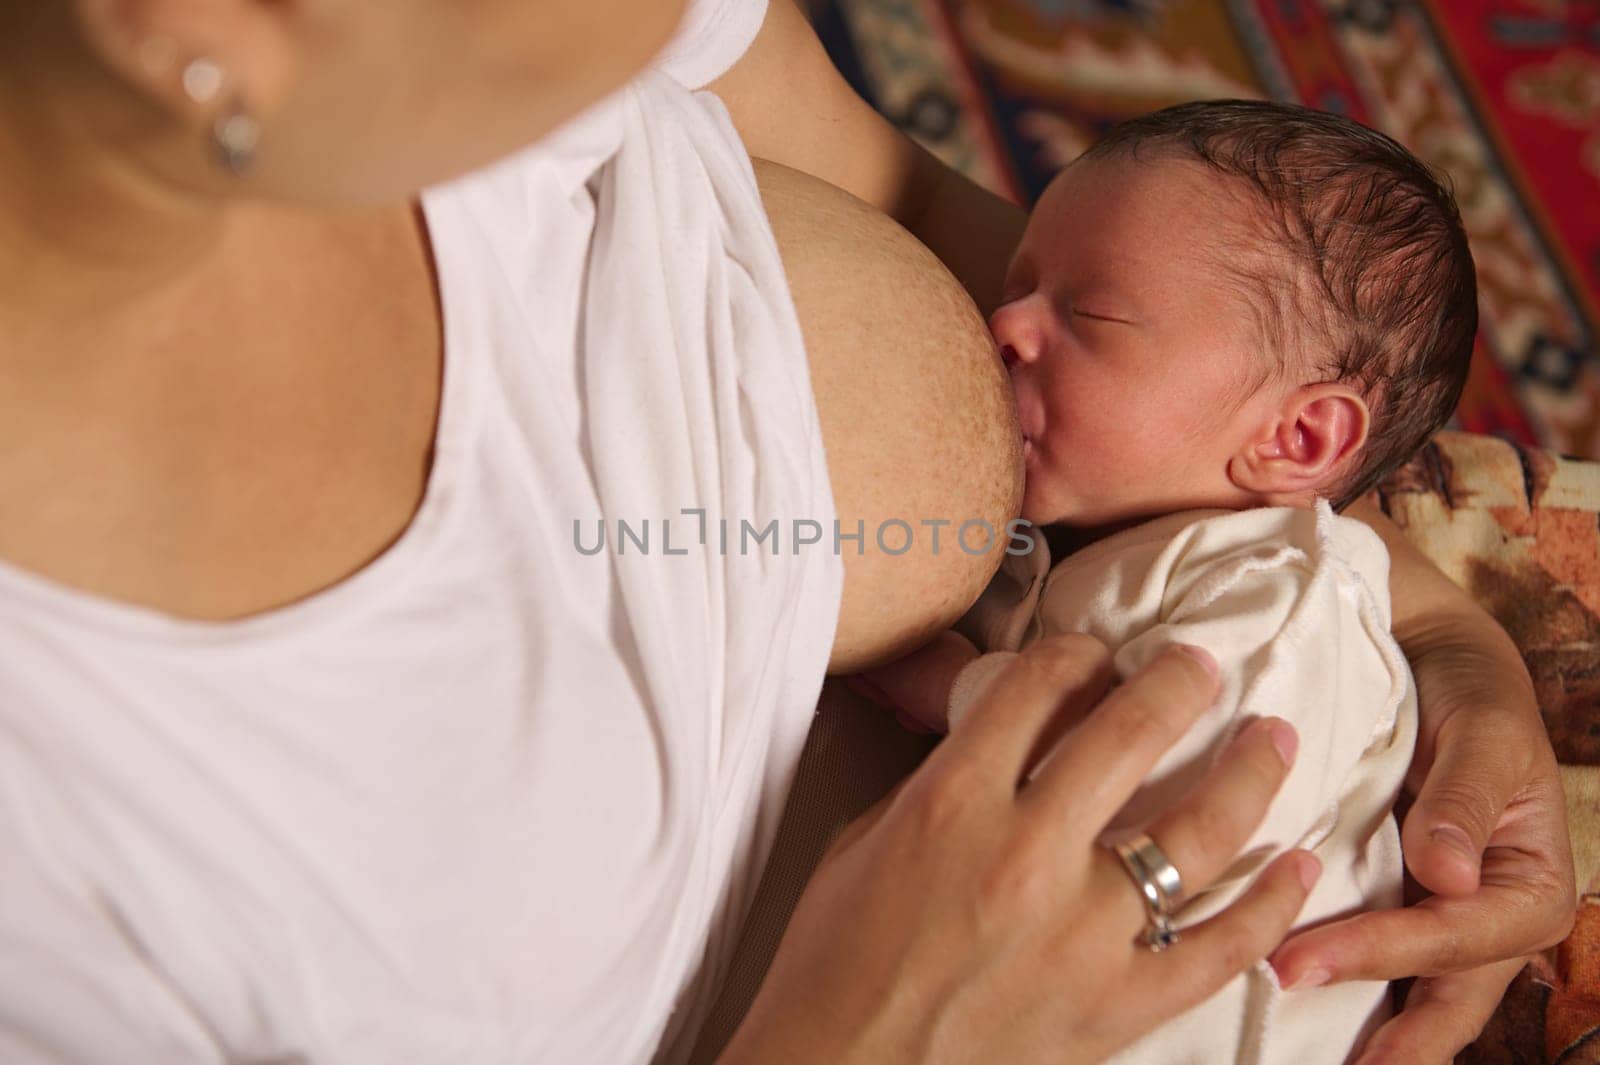 Close-up of a young woman breastfeeding her newborn baby at home by artgf